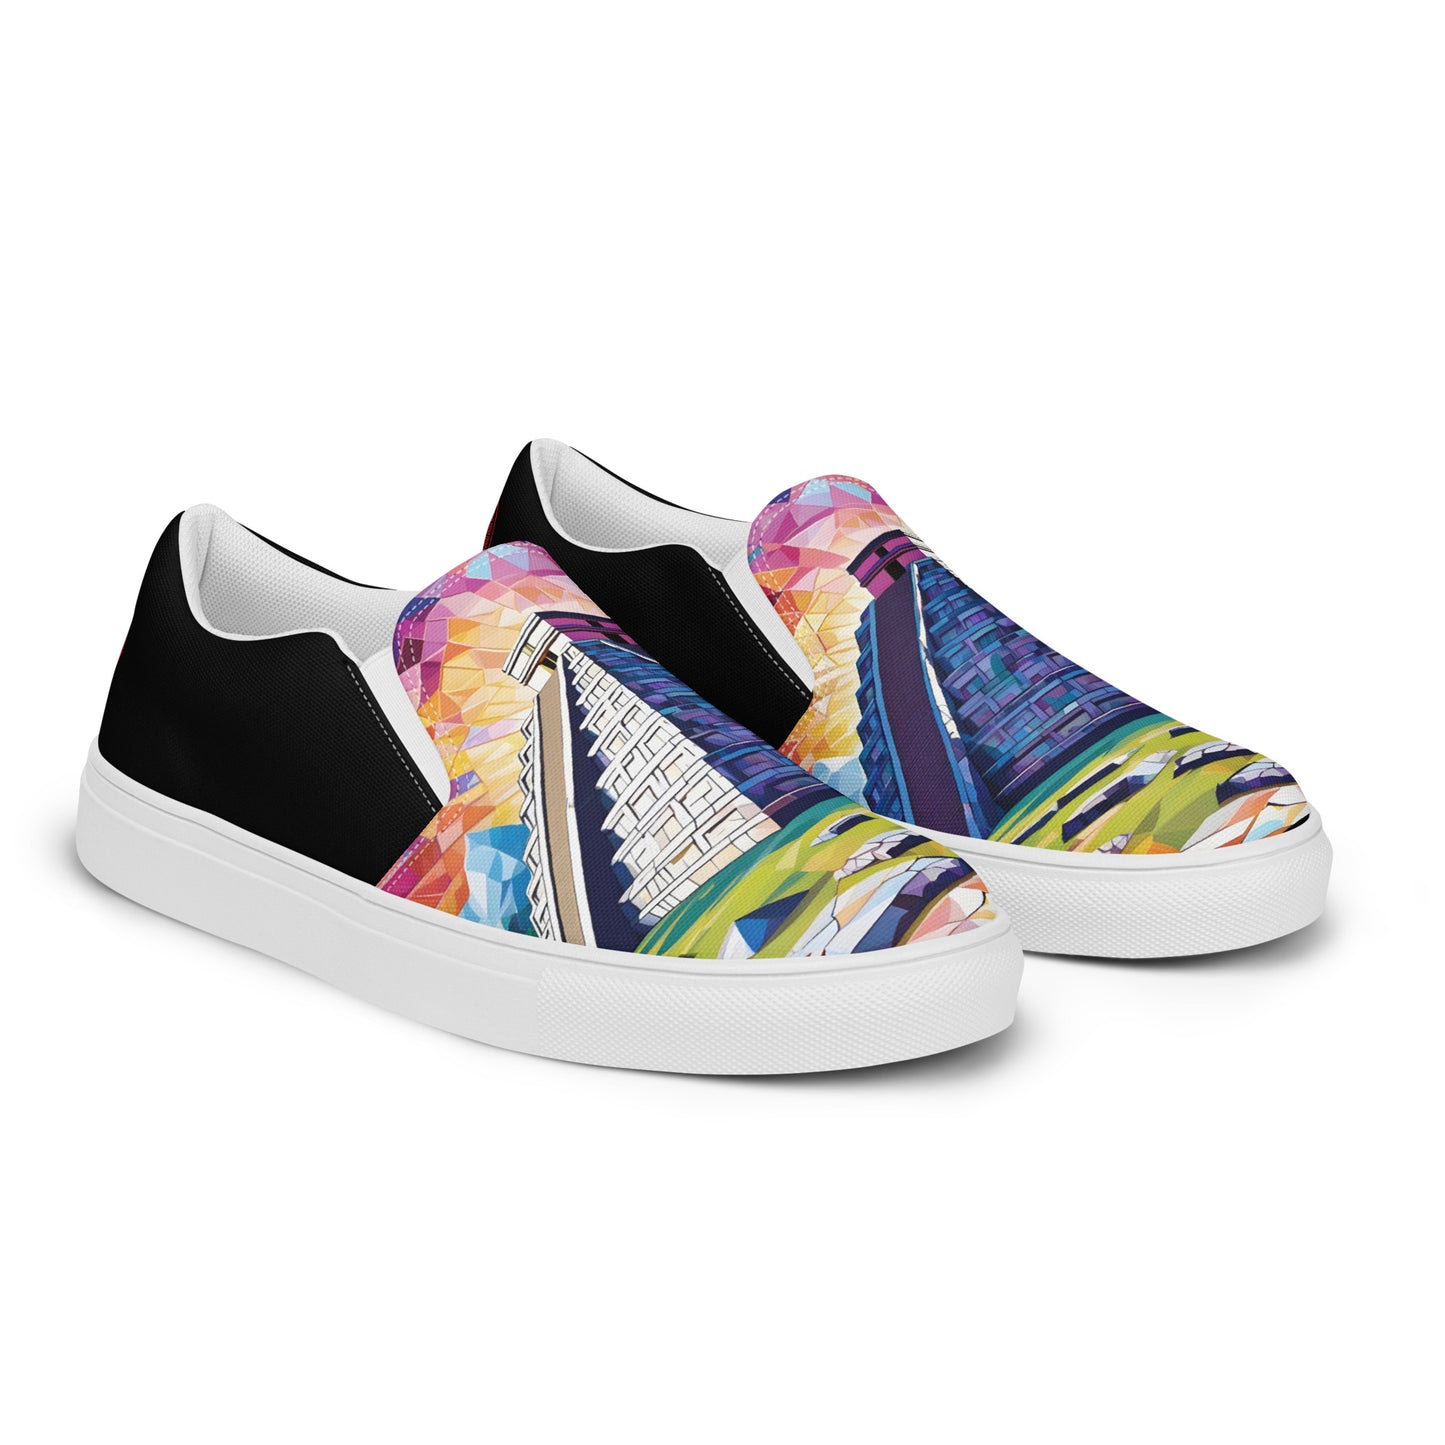 Chichén Itzá - Stained glass - Men - Black - Slip-on shoes